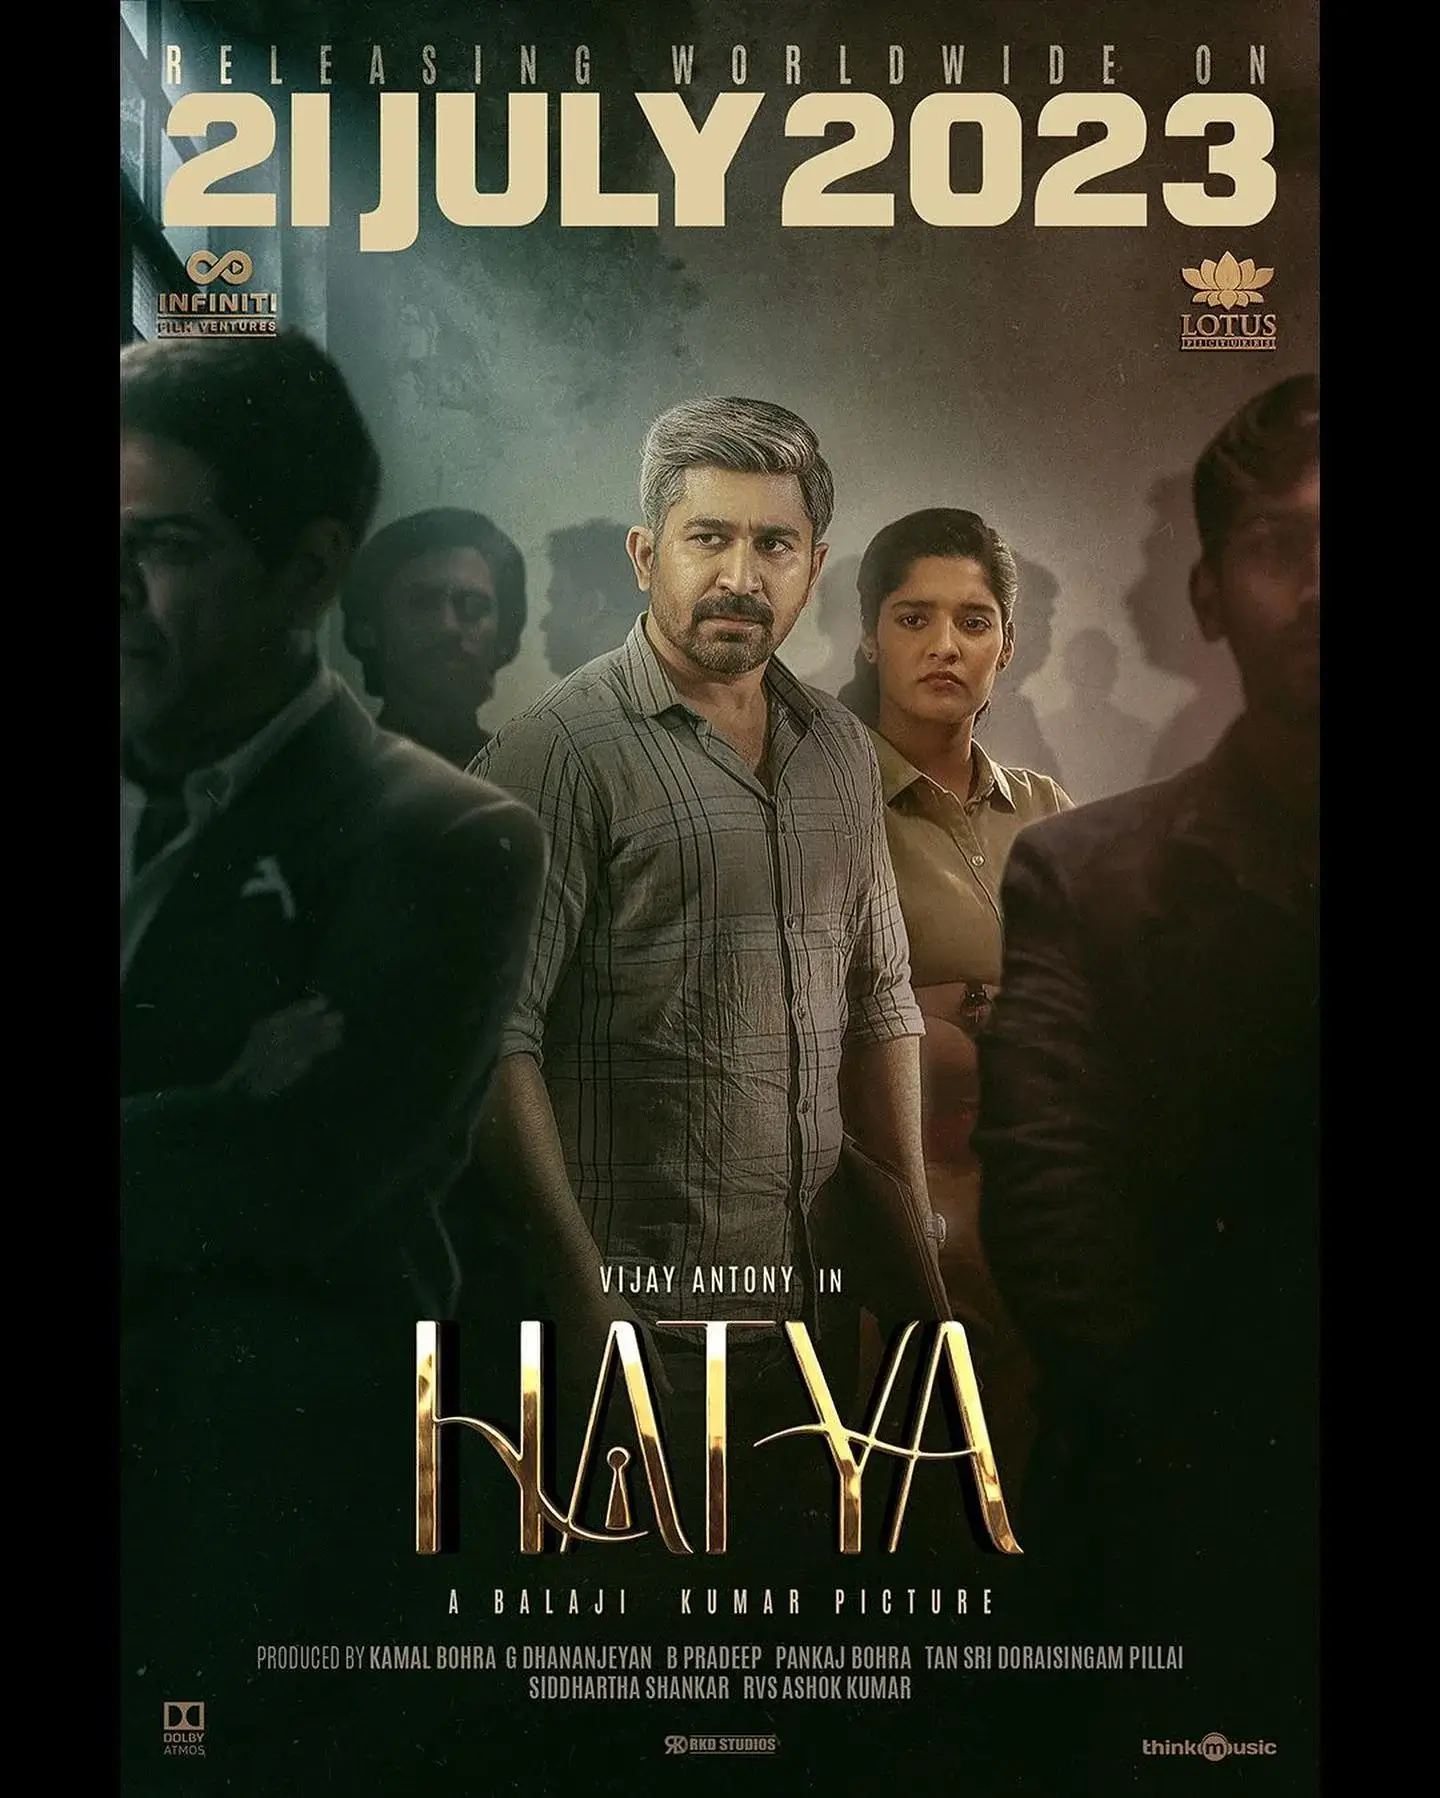 Hatya (2023) Cast, Release Date, Story and more Telugu Movie